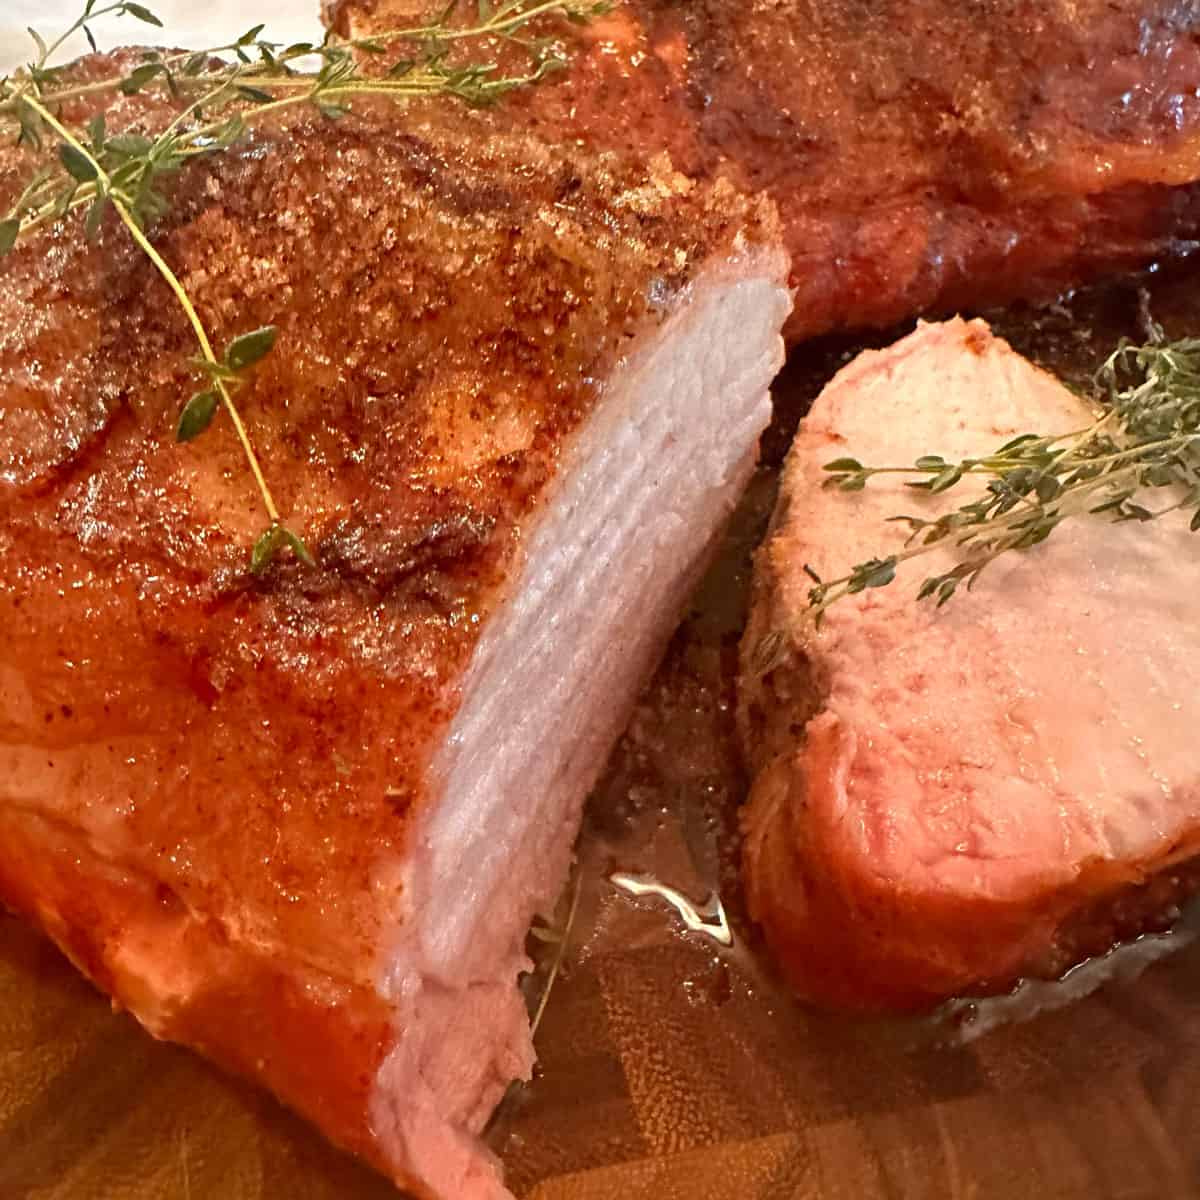 Some juicy sliced pork loin on a cutting board.
